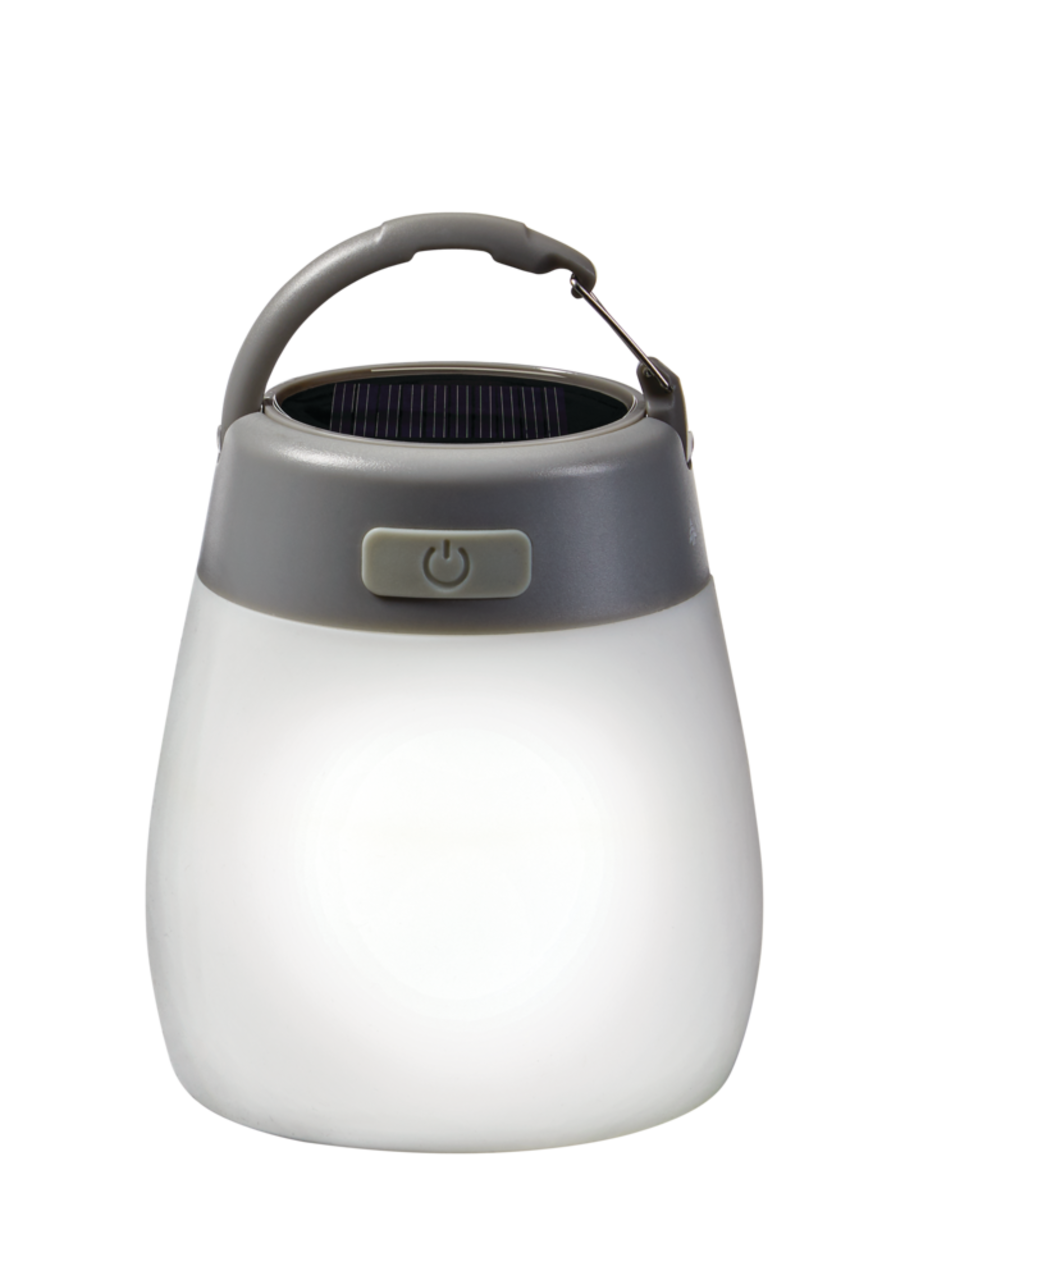 Lampe solaire de camping 18 led - Provence Outillage